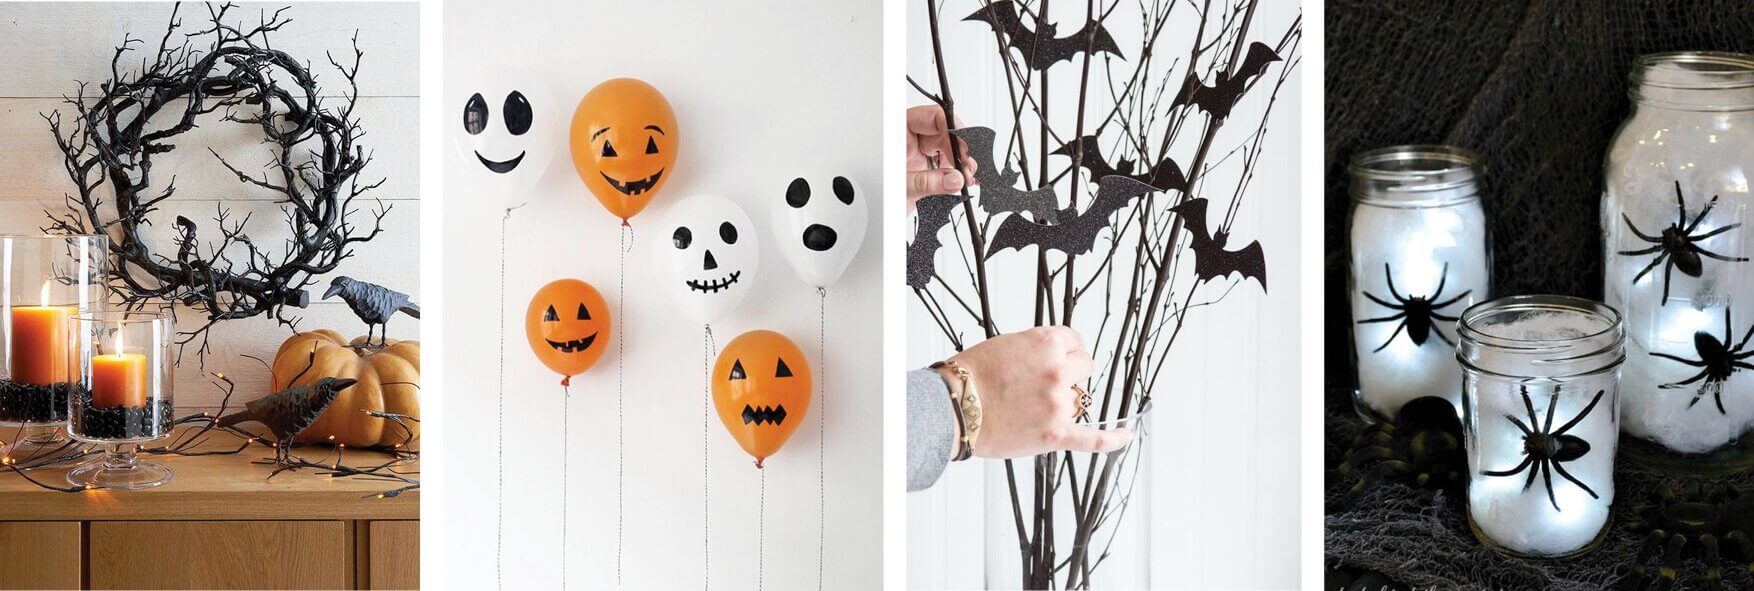 Halloween Images decorations